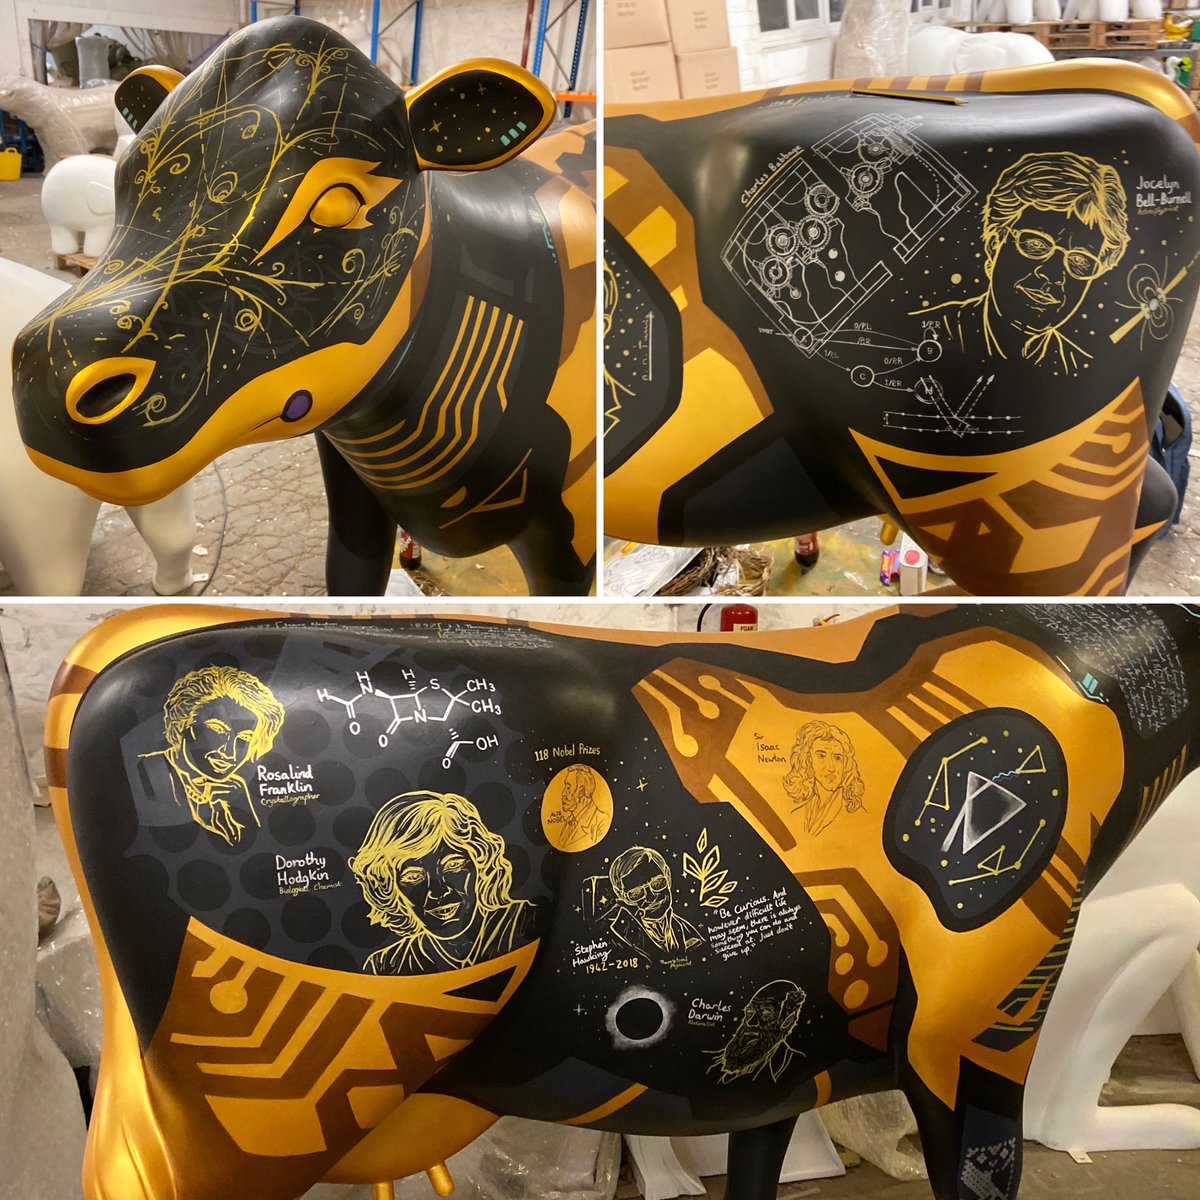 Attention Cambridge STEM peeps! - I need local researchers to come sign my 'STEM Cow public Science Communication sculpture! -  The sculpture celebrates all scientific research in Cambridge, both past and present! 
Sign up here!: 
forms.gle/jWKK5z6ZQwkzcD…
#scicomm #sciart